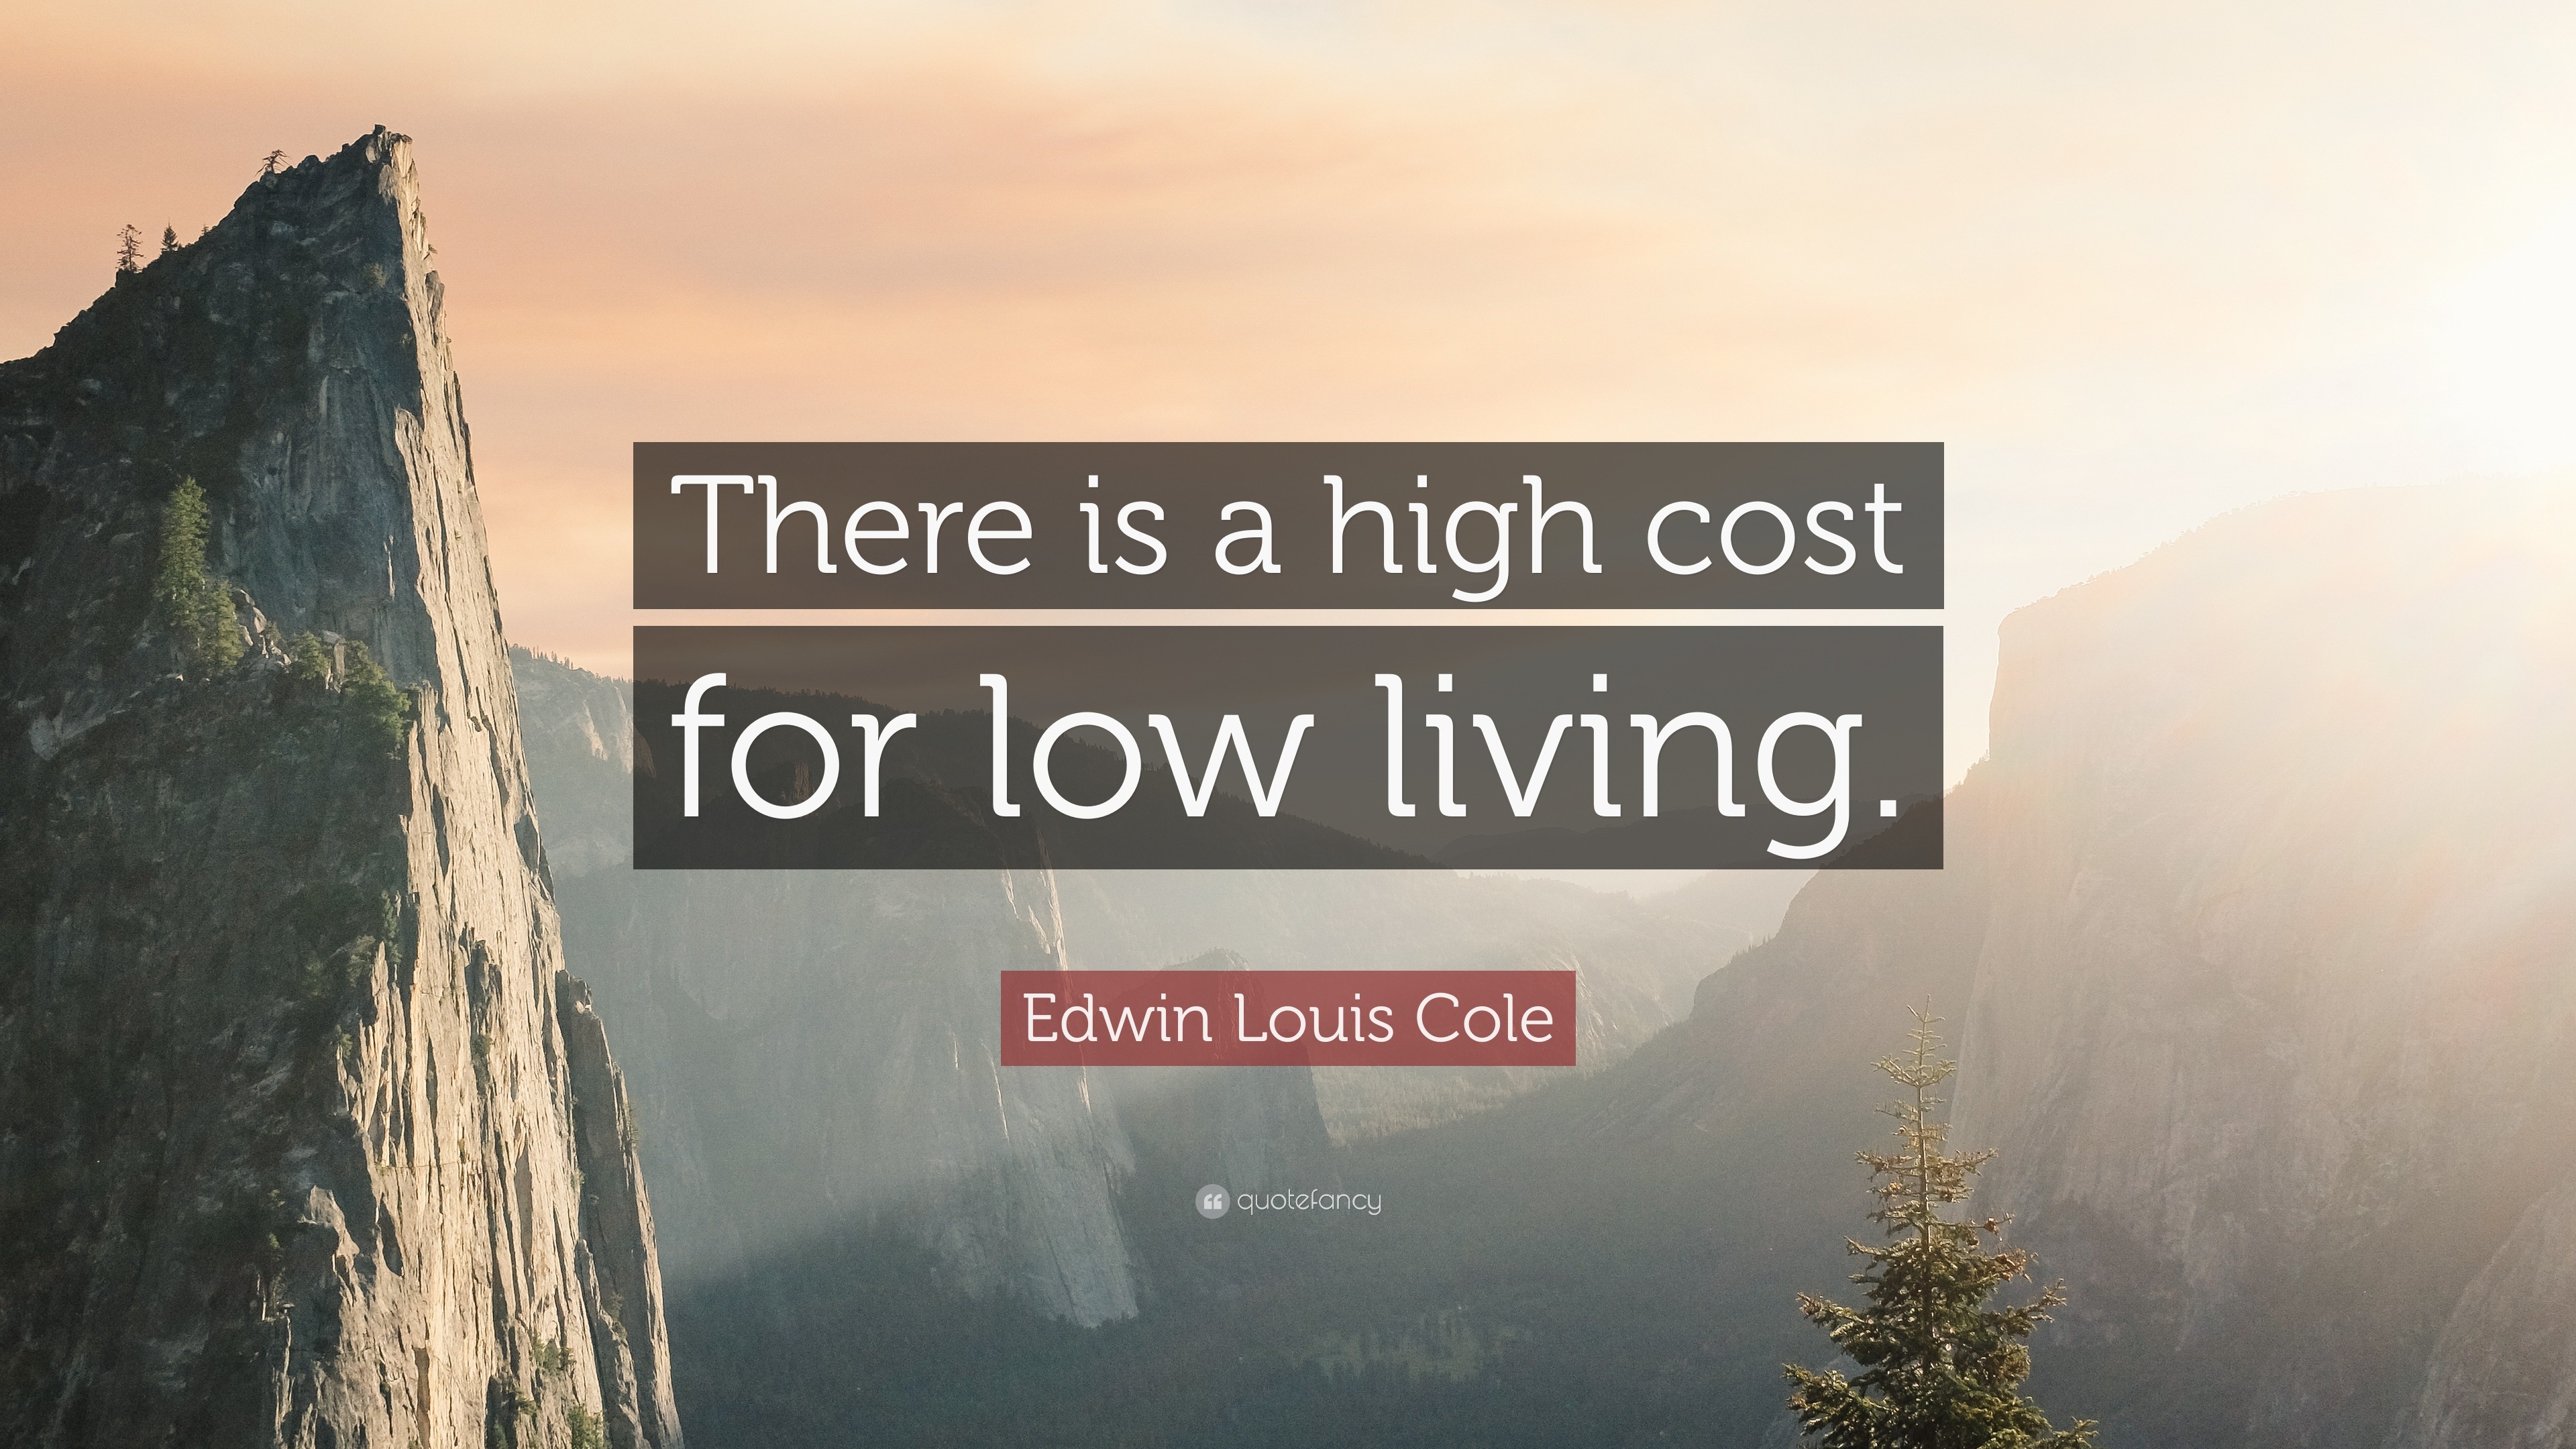 QUOTE OF THE DAY BY EDWIN LOUIS COLE » Naijasermons